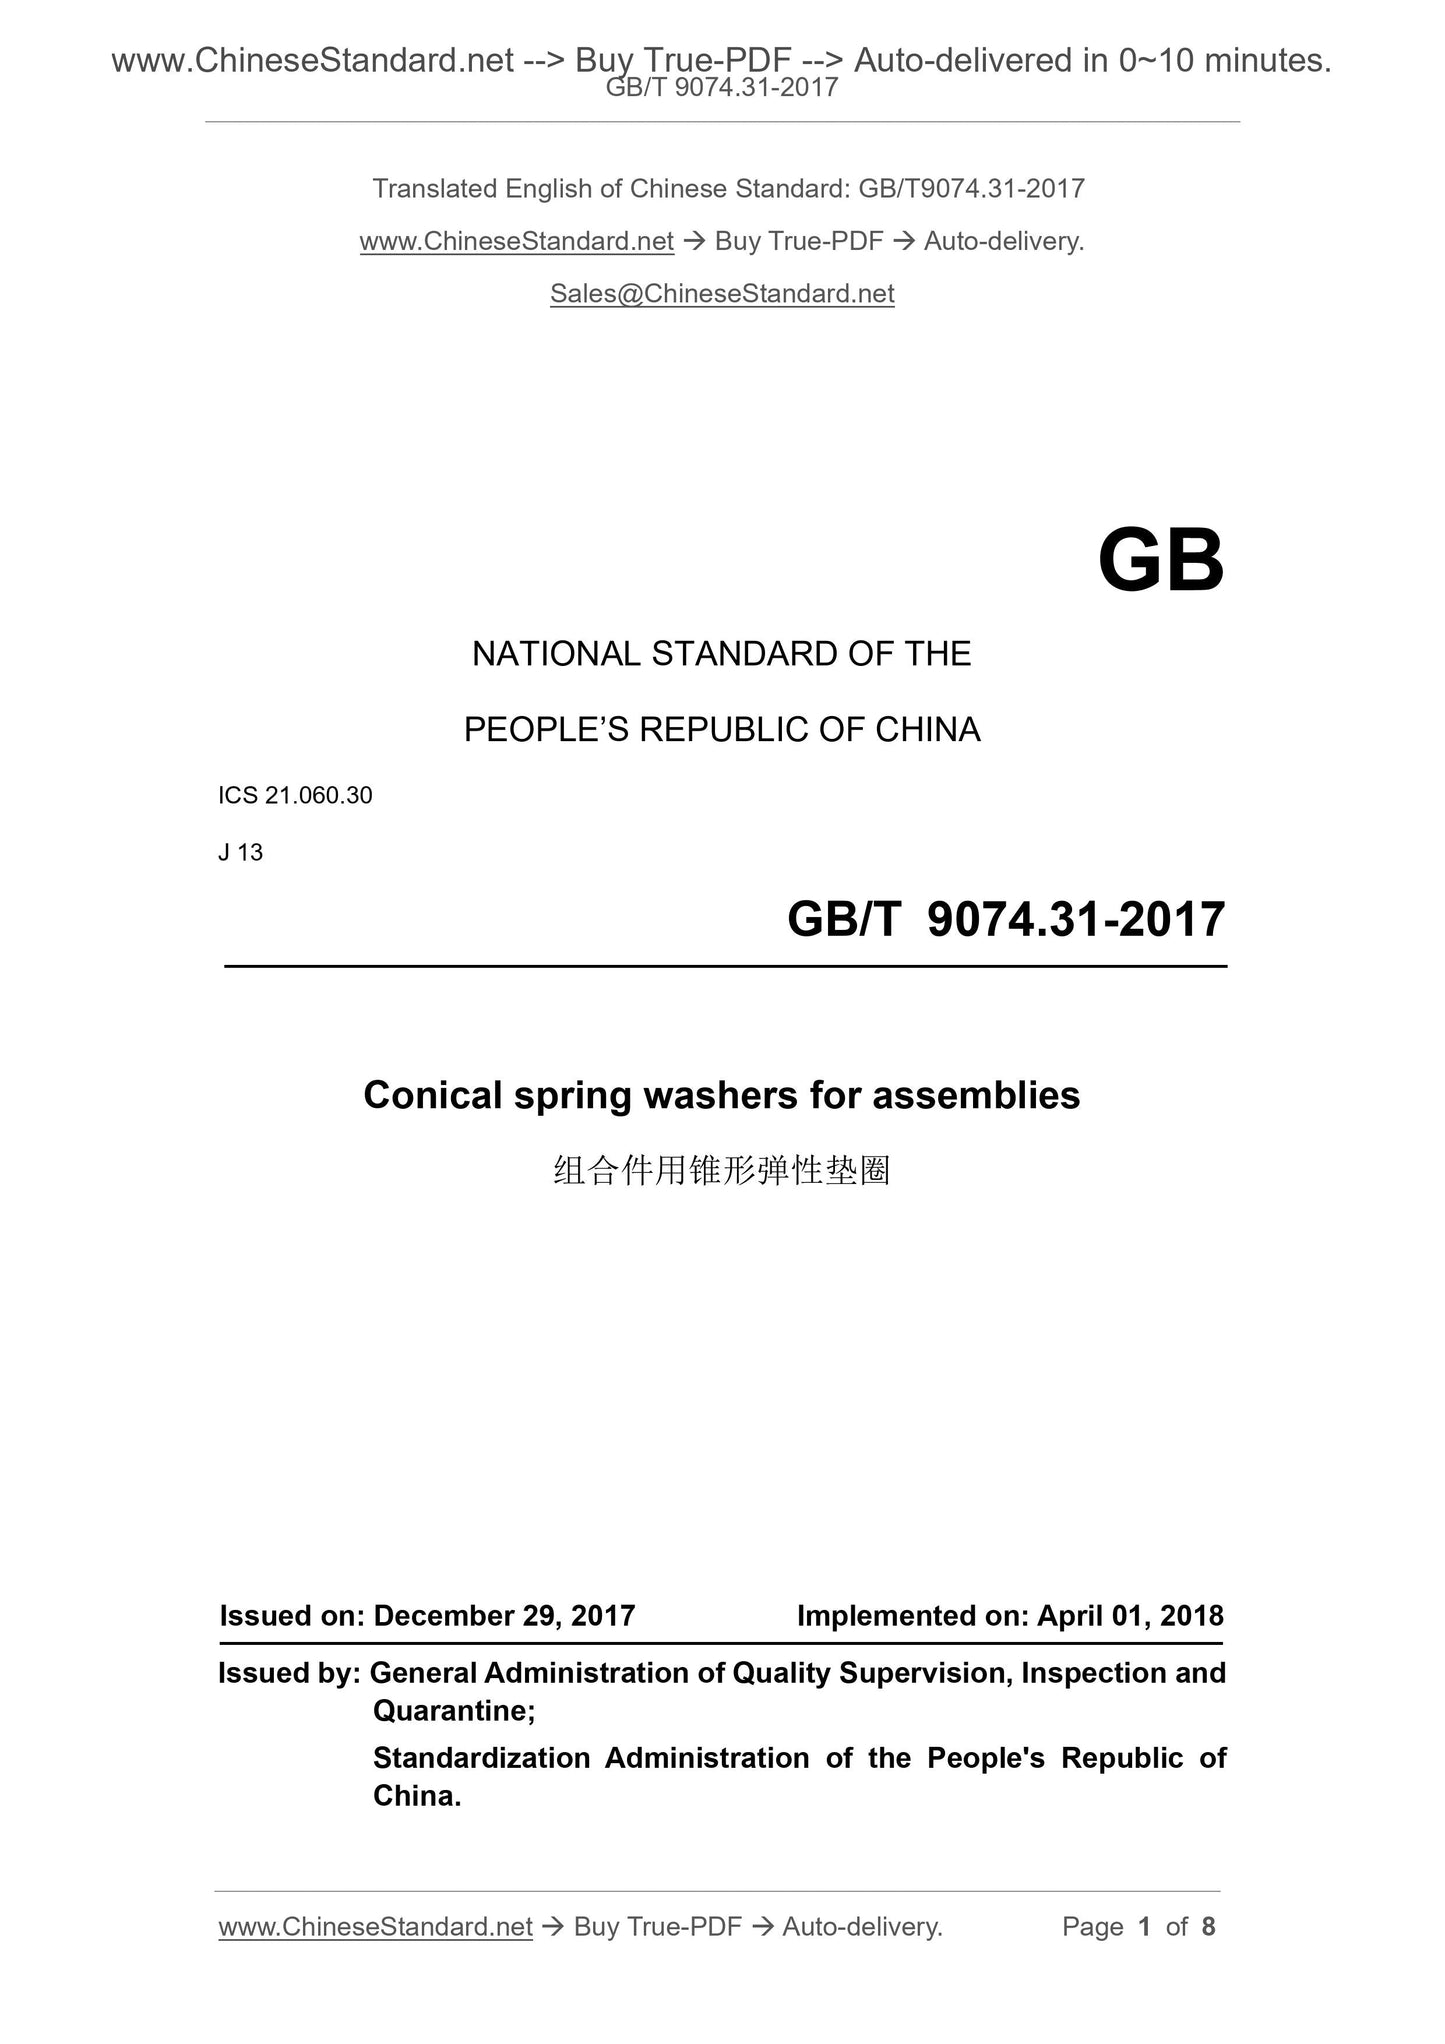 GB/T 9074.31-2017 Page 1